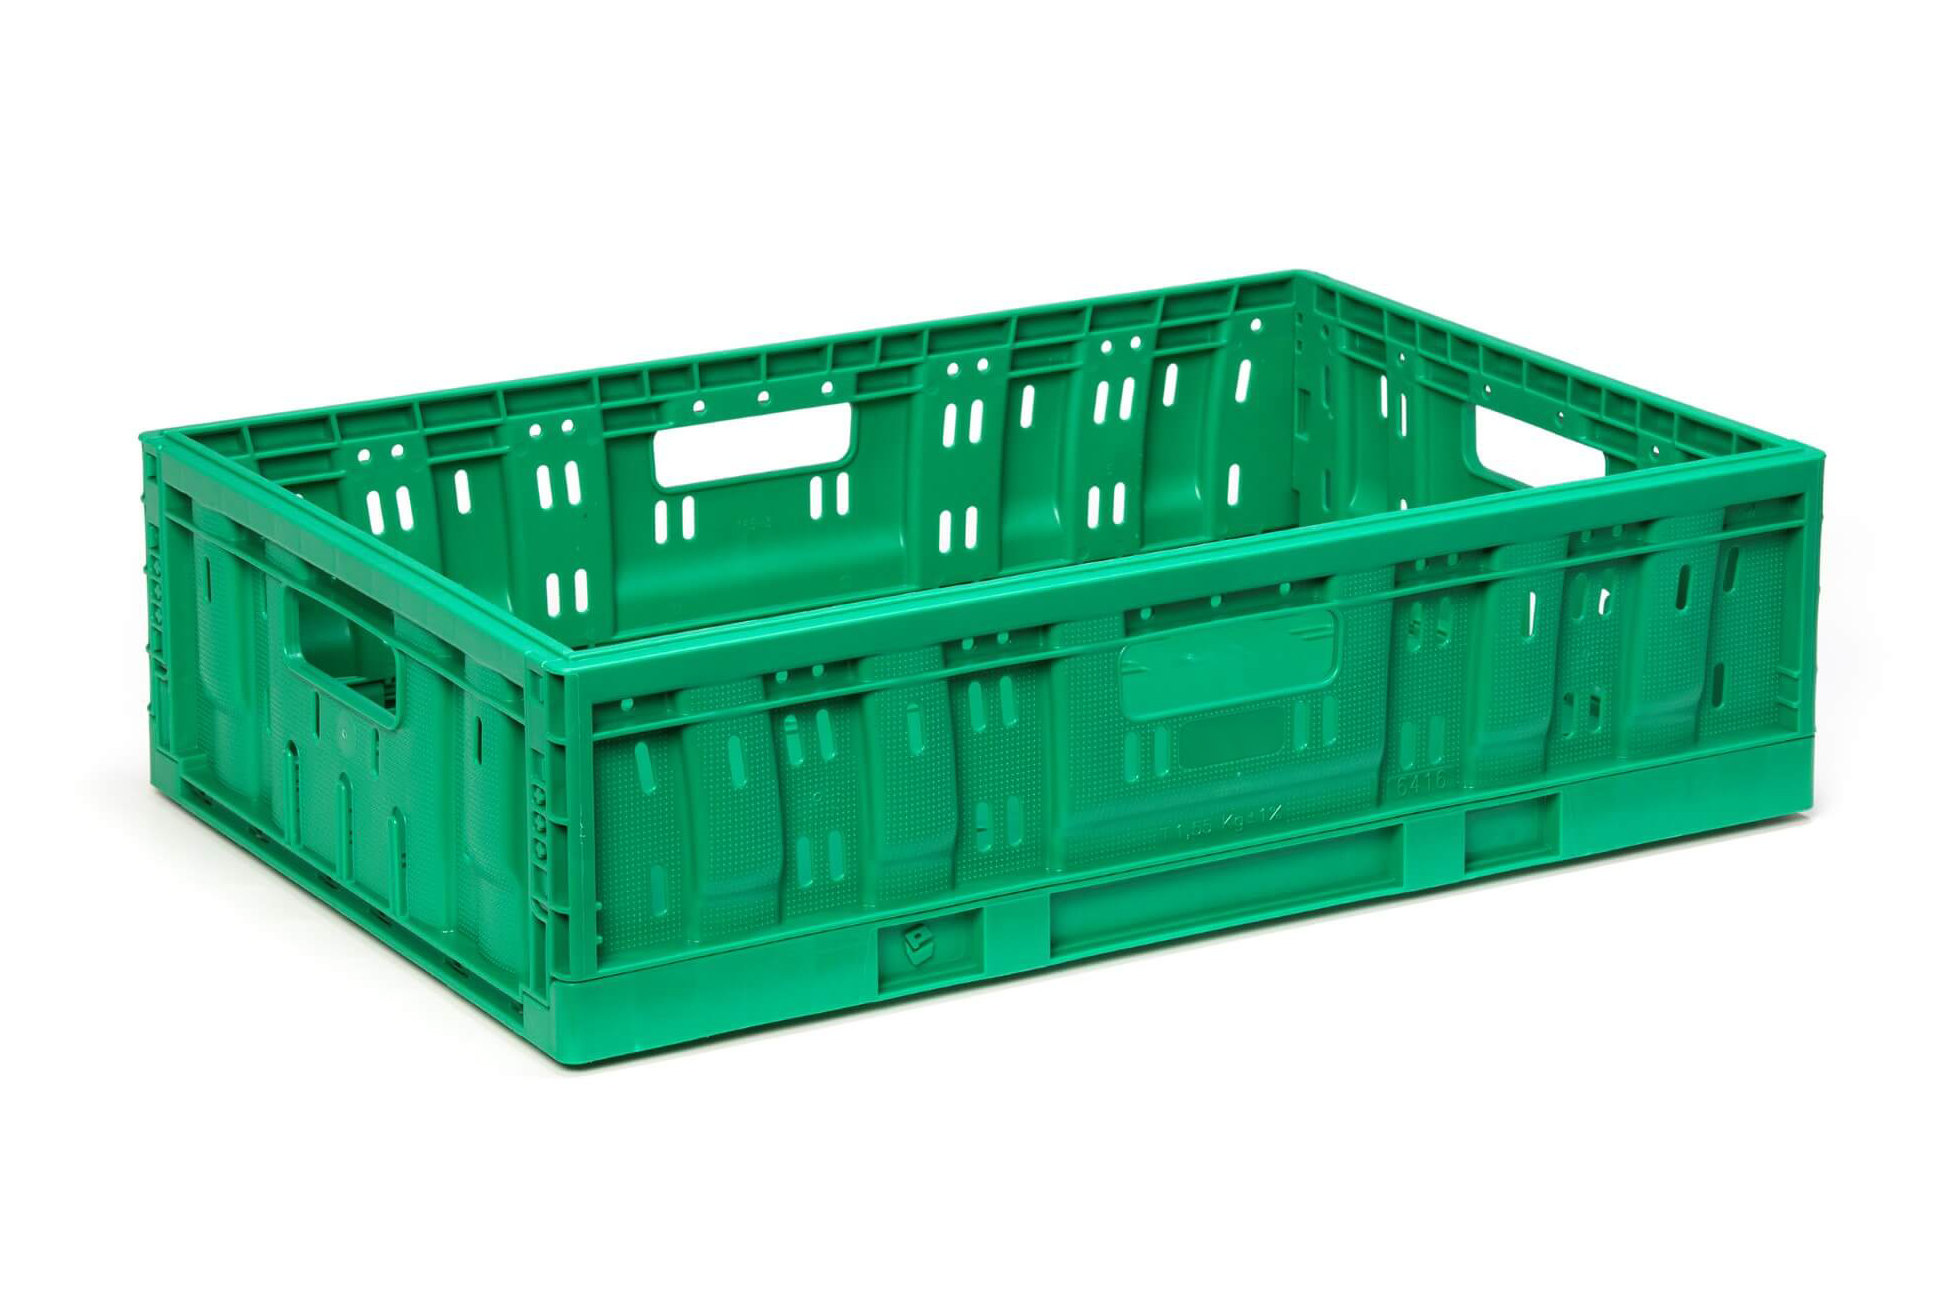 16 x 12 x 05 – Collapsible Handheld Container